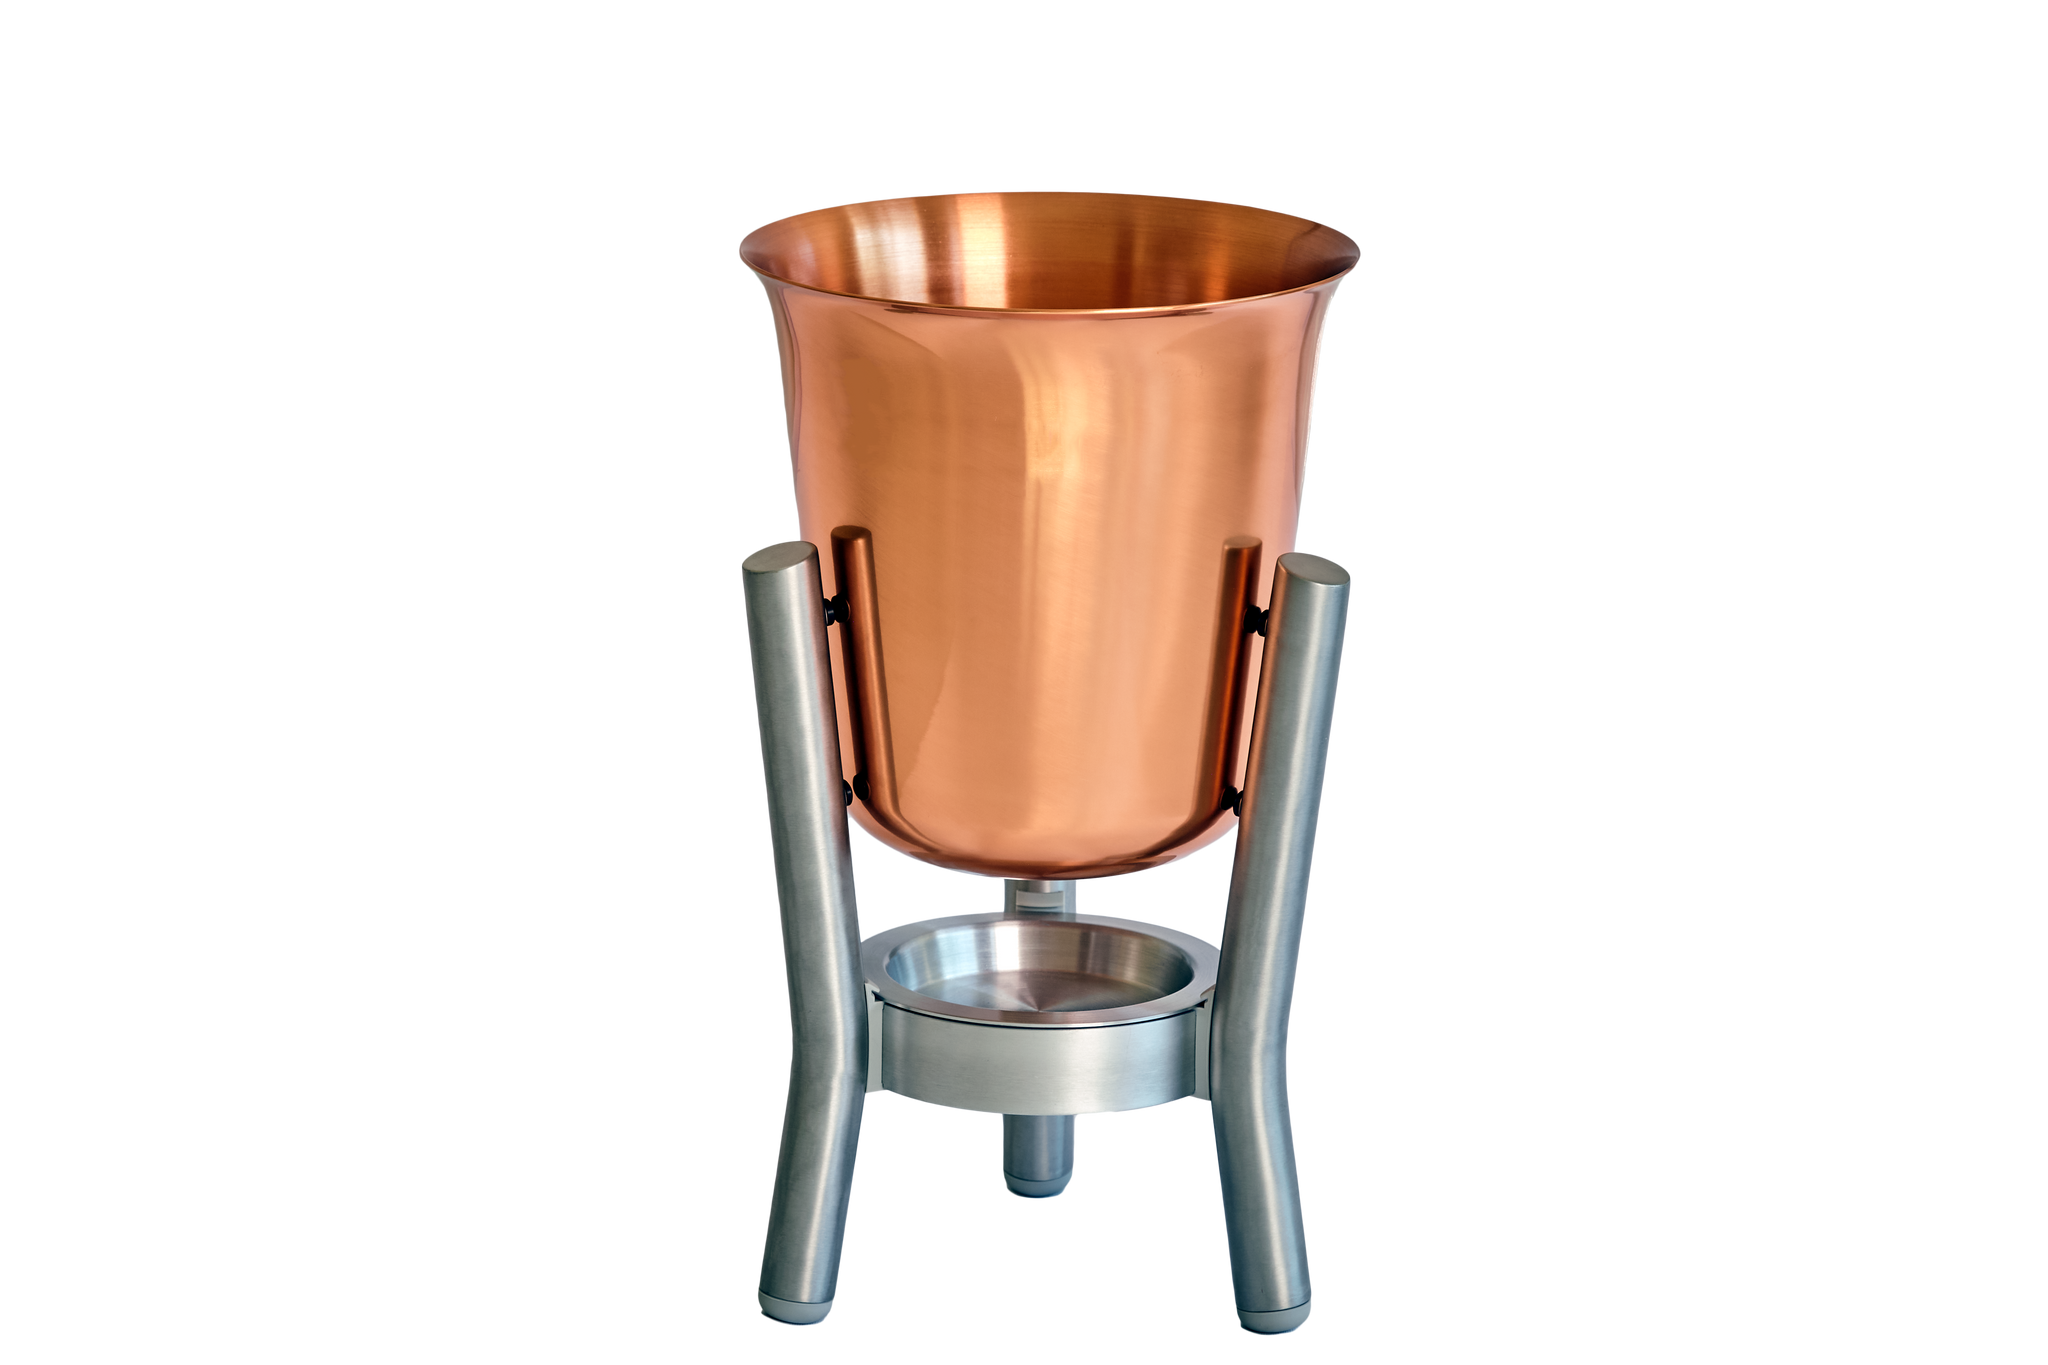 100% Copper Champagne Cooler with Stainless Steel Stand